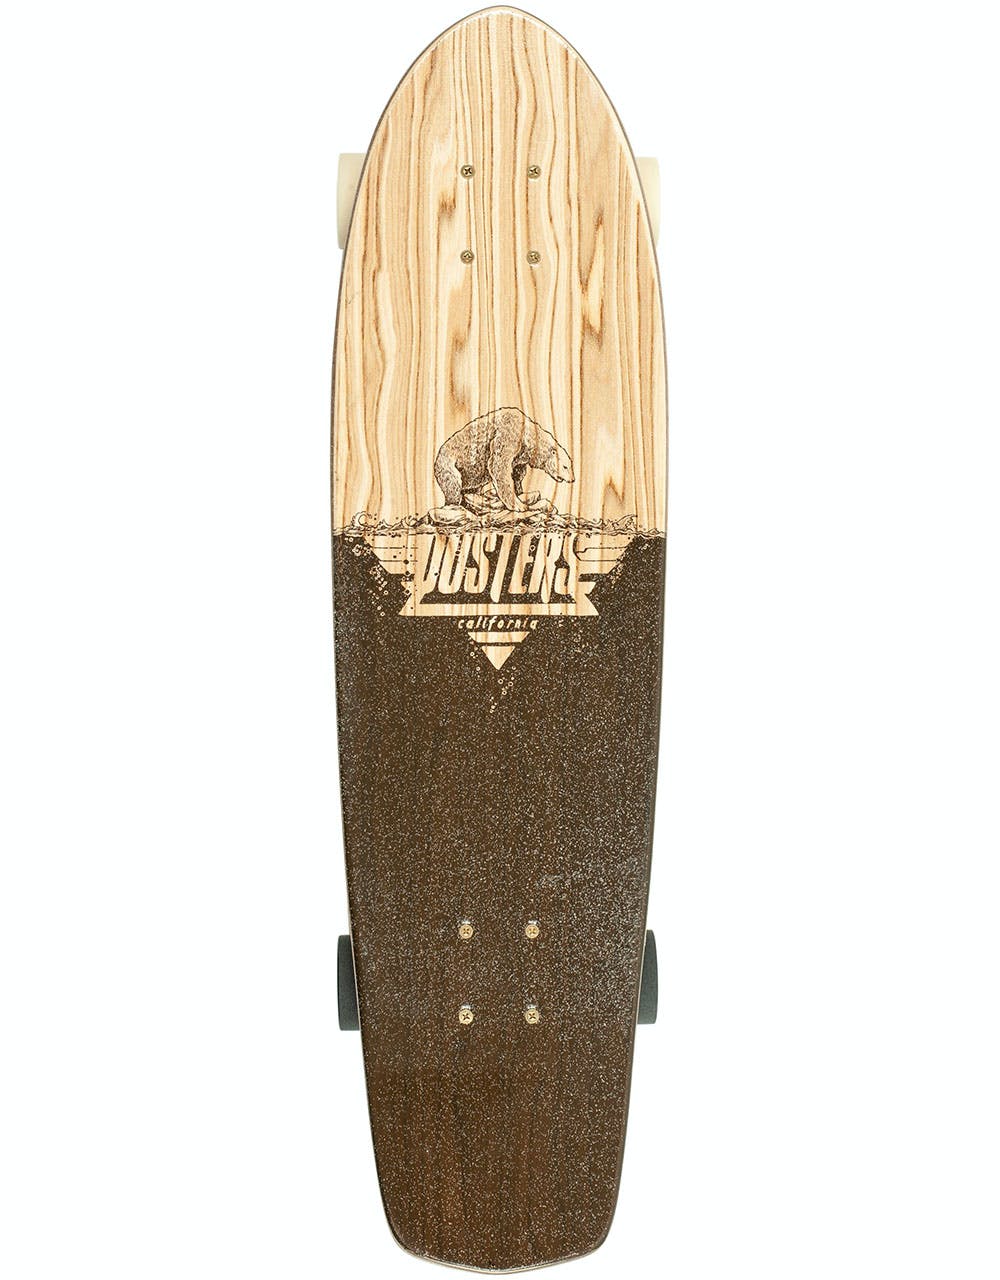 Dusters Kerby Cruiser - 8.25" x 31"